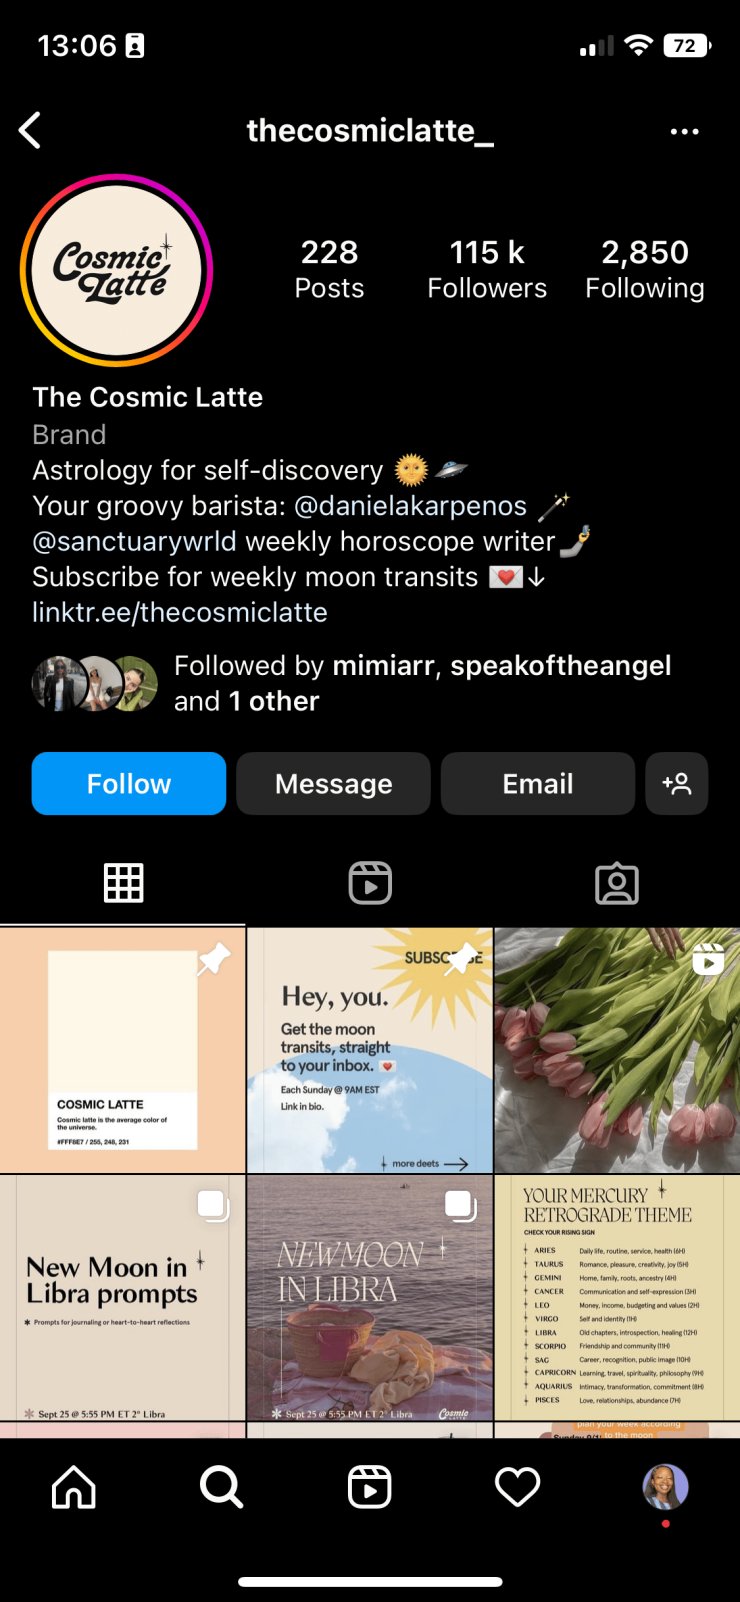 6 Ideas to Make the Most of Your Instagram Bio